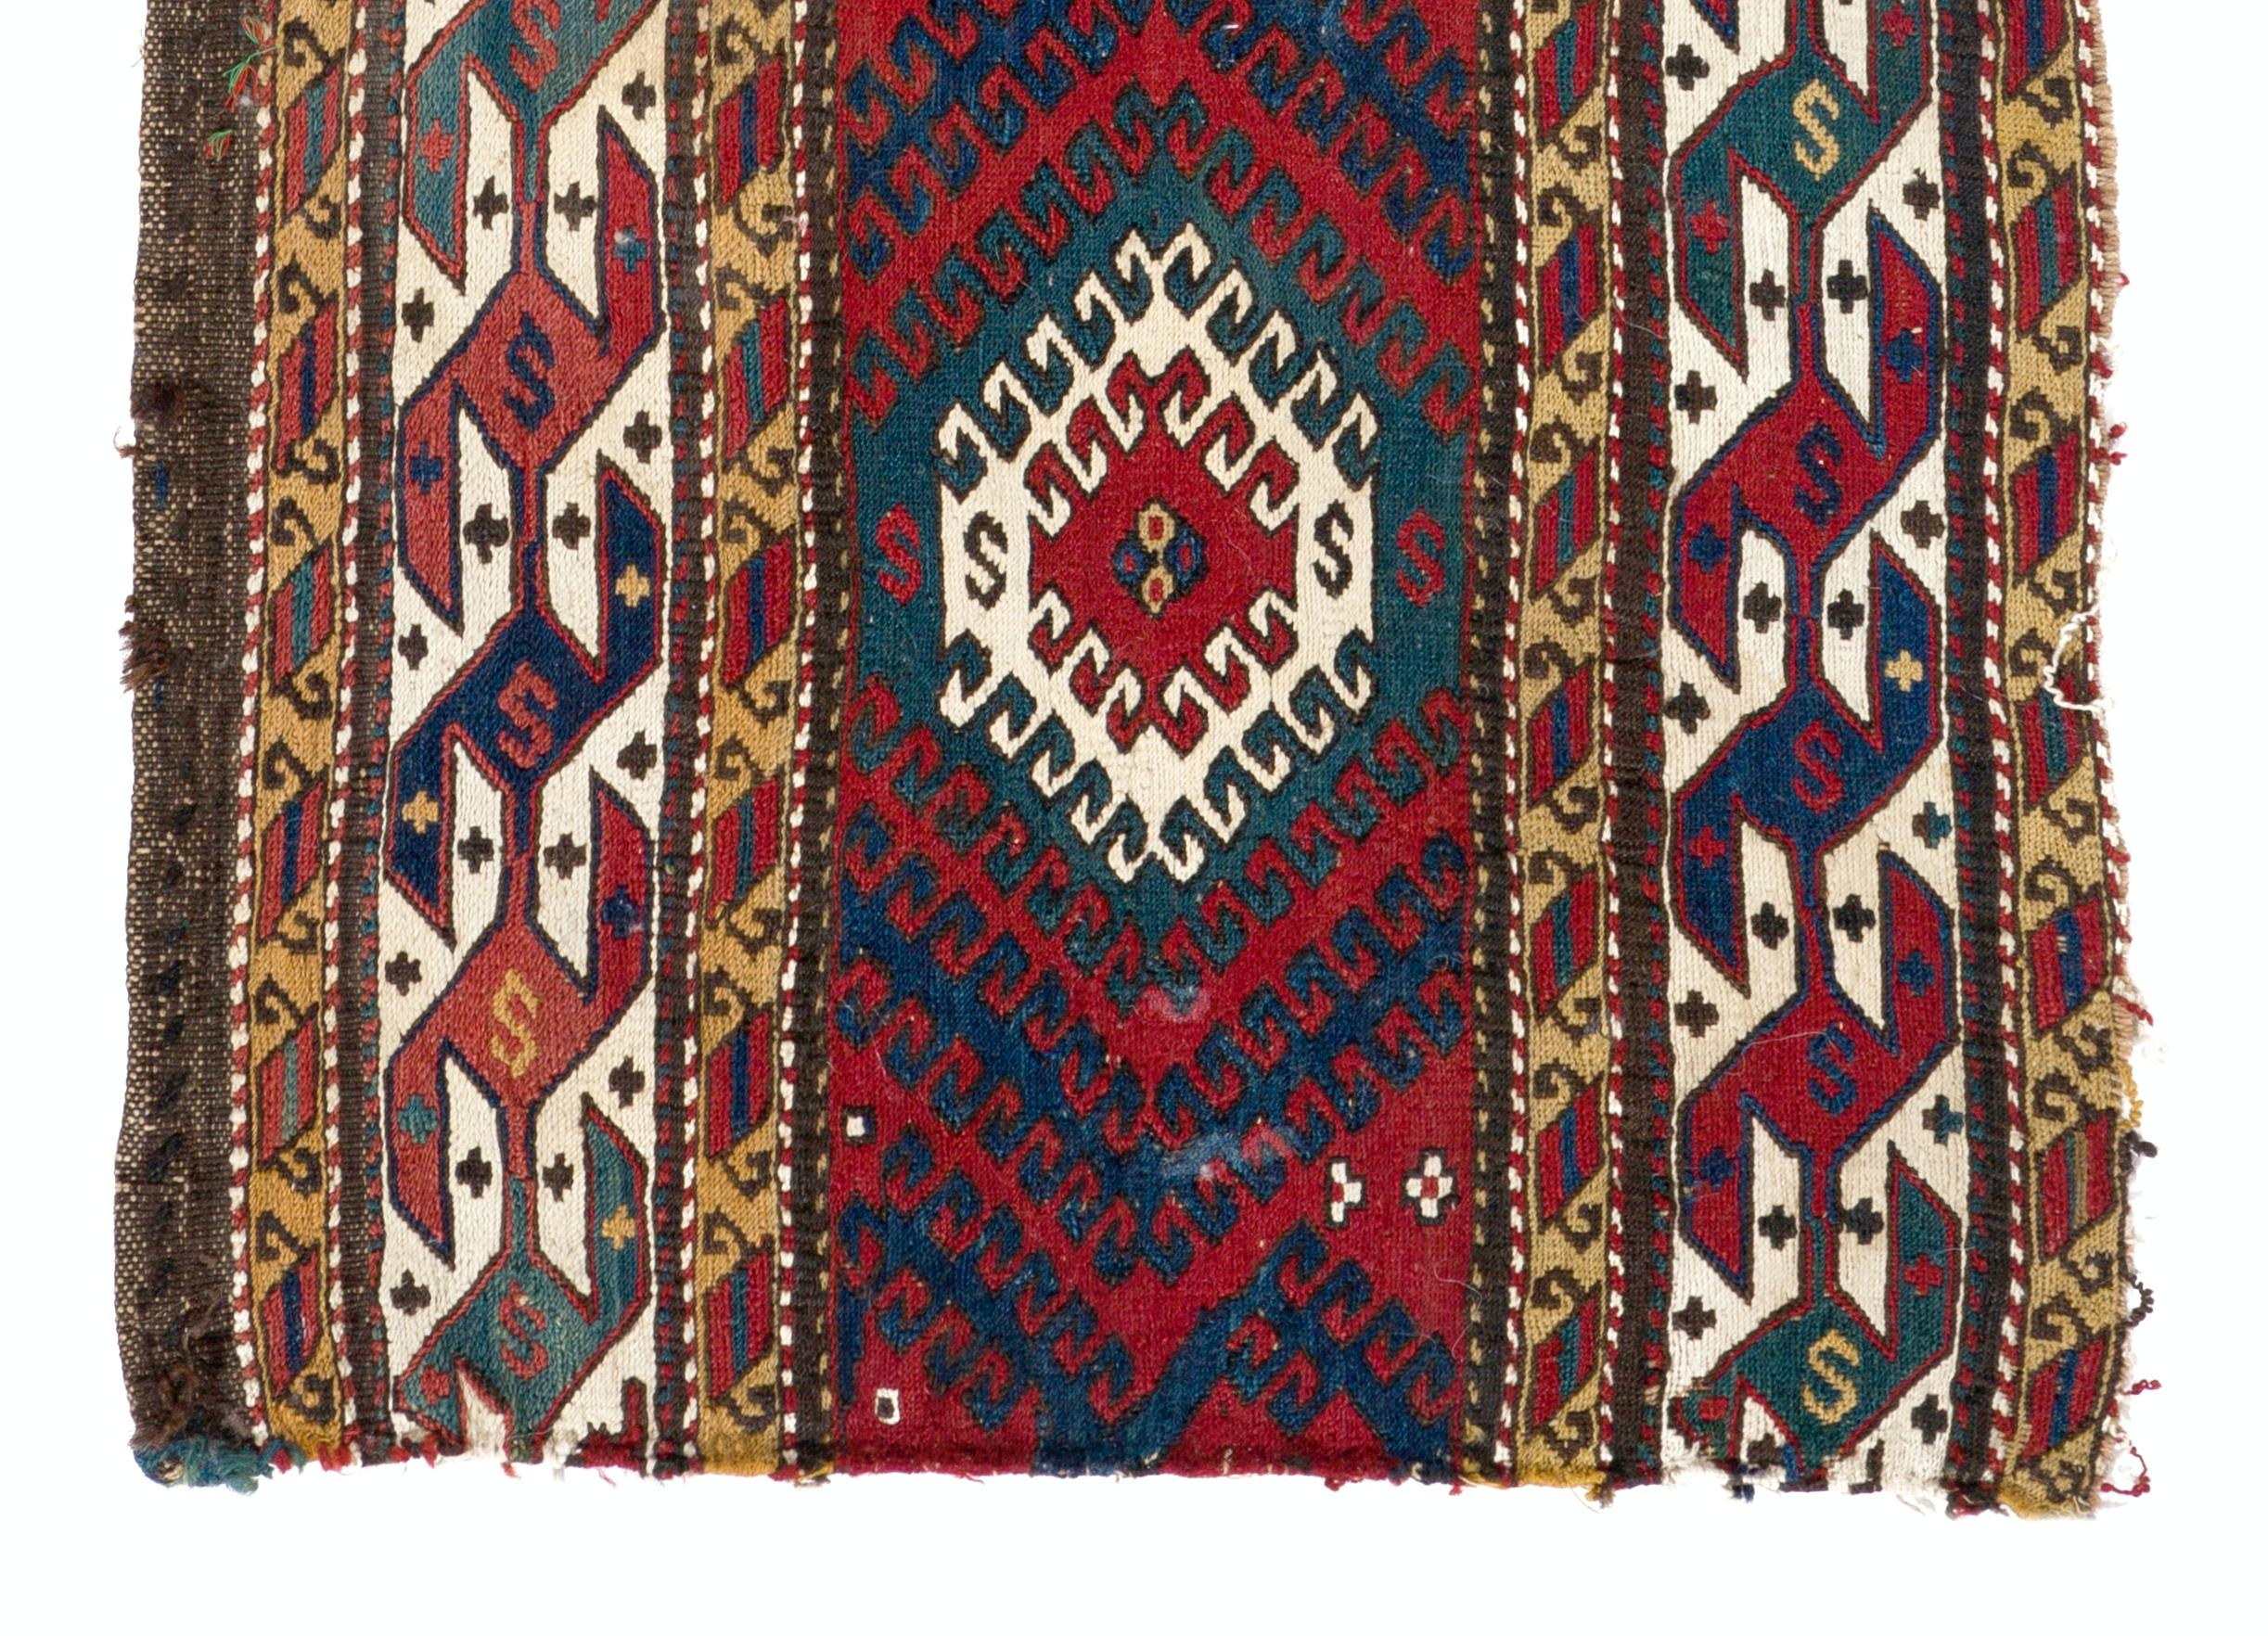 This splendid work of textile art is a side panel of an antique Caucasian Mafrash (baby's cradle). It is all naturally dyed and handwoven in soumak technique with using wool and cotton.